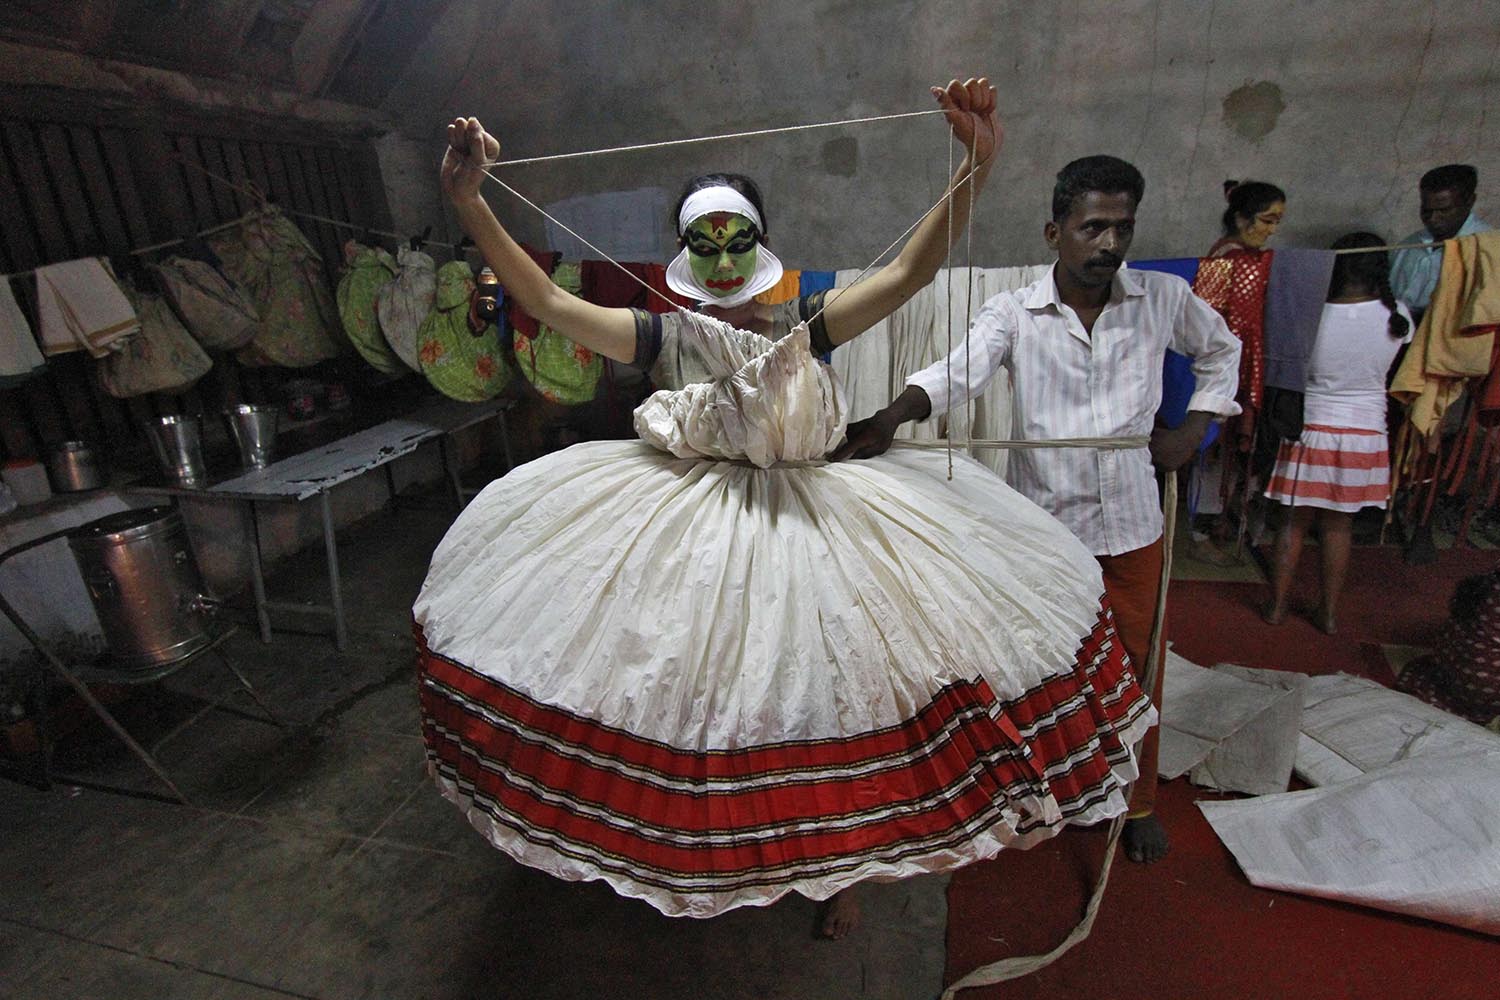 A Kathakali dancer wears a dress ahead of her performance during the annual Vrischikotsavam festival at a temple in Kochi